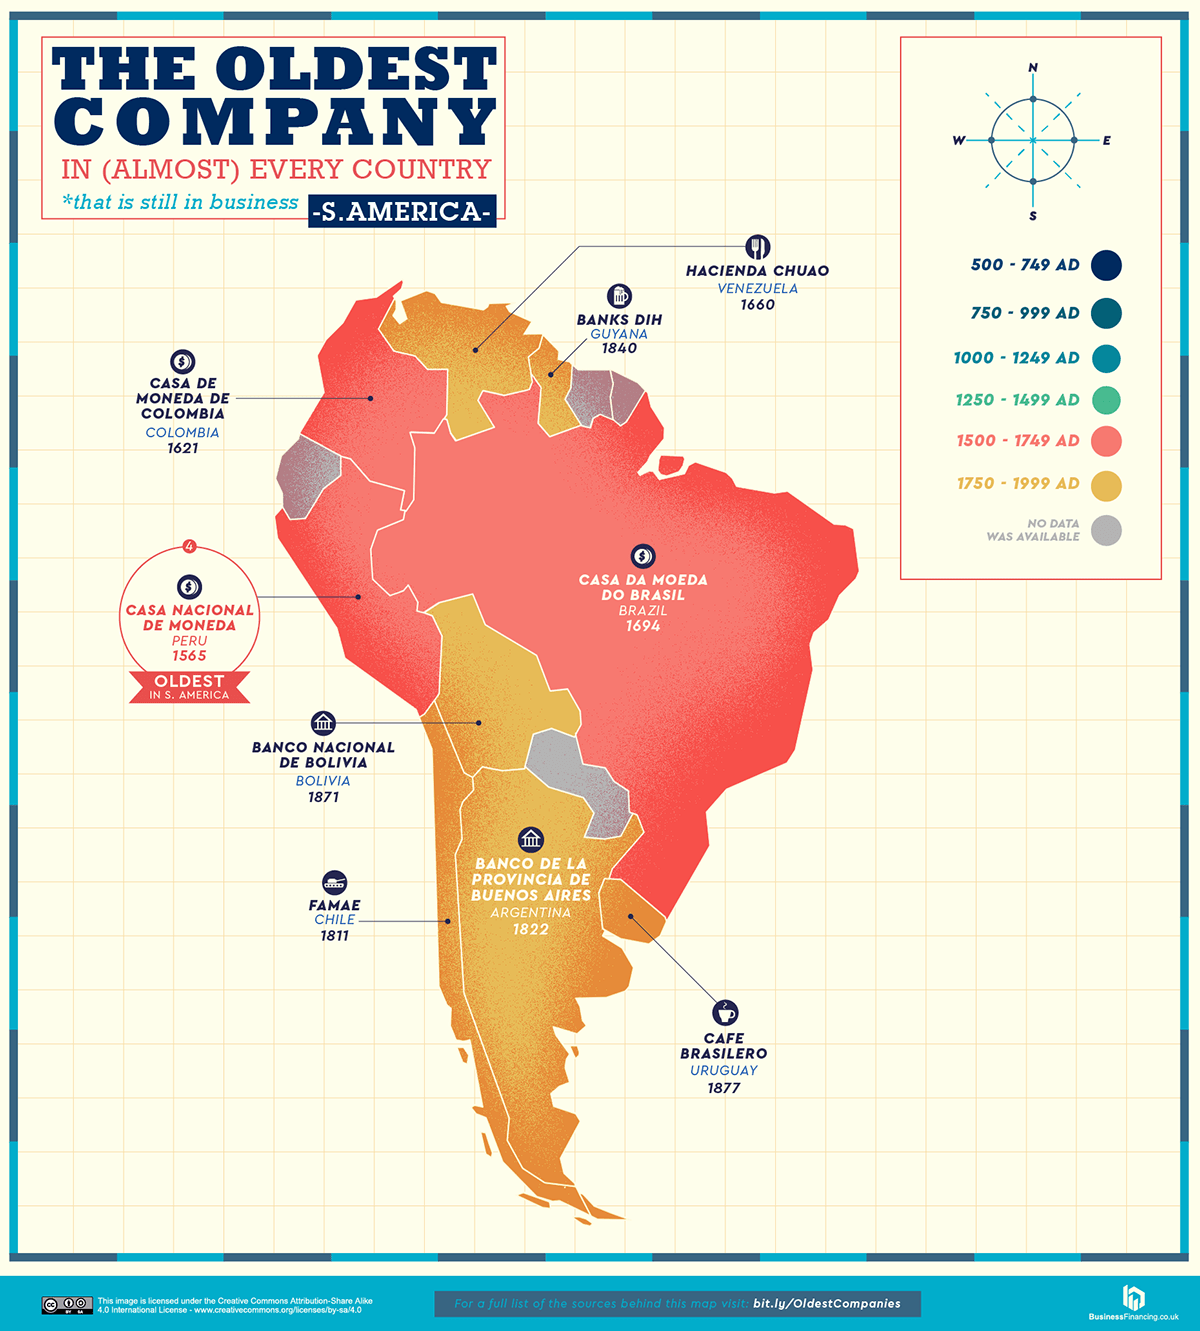 The oldest companies in South America.